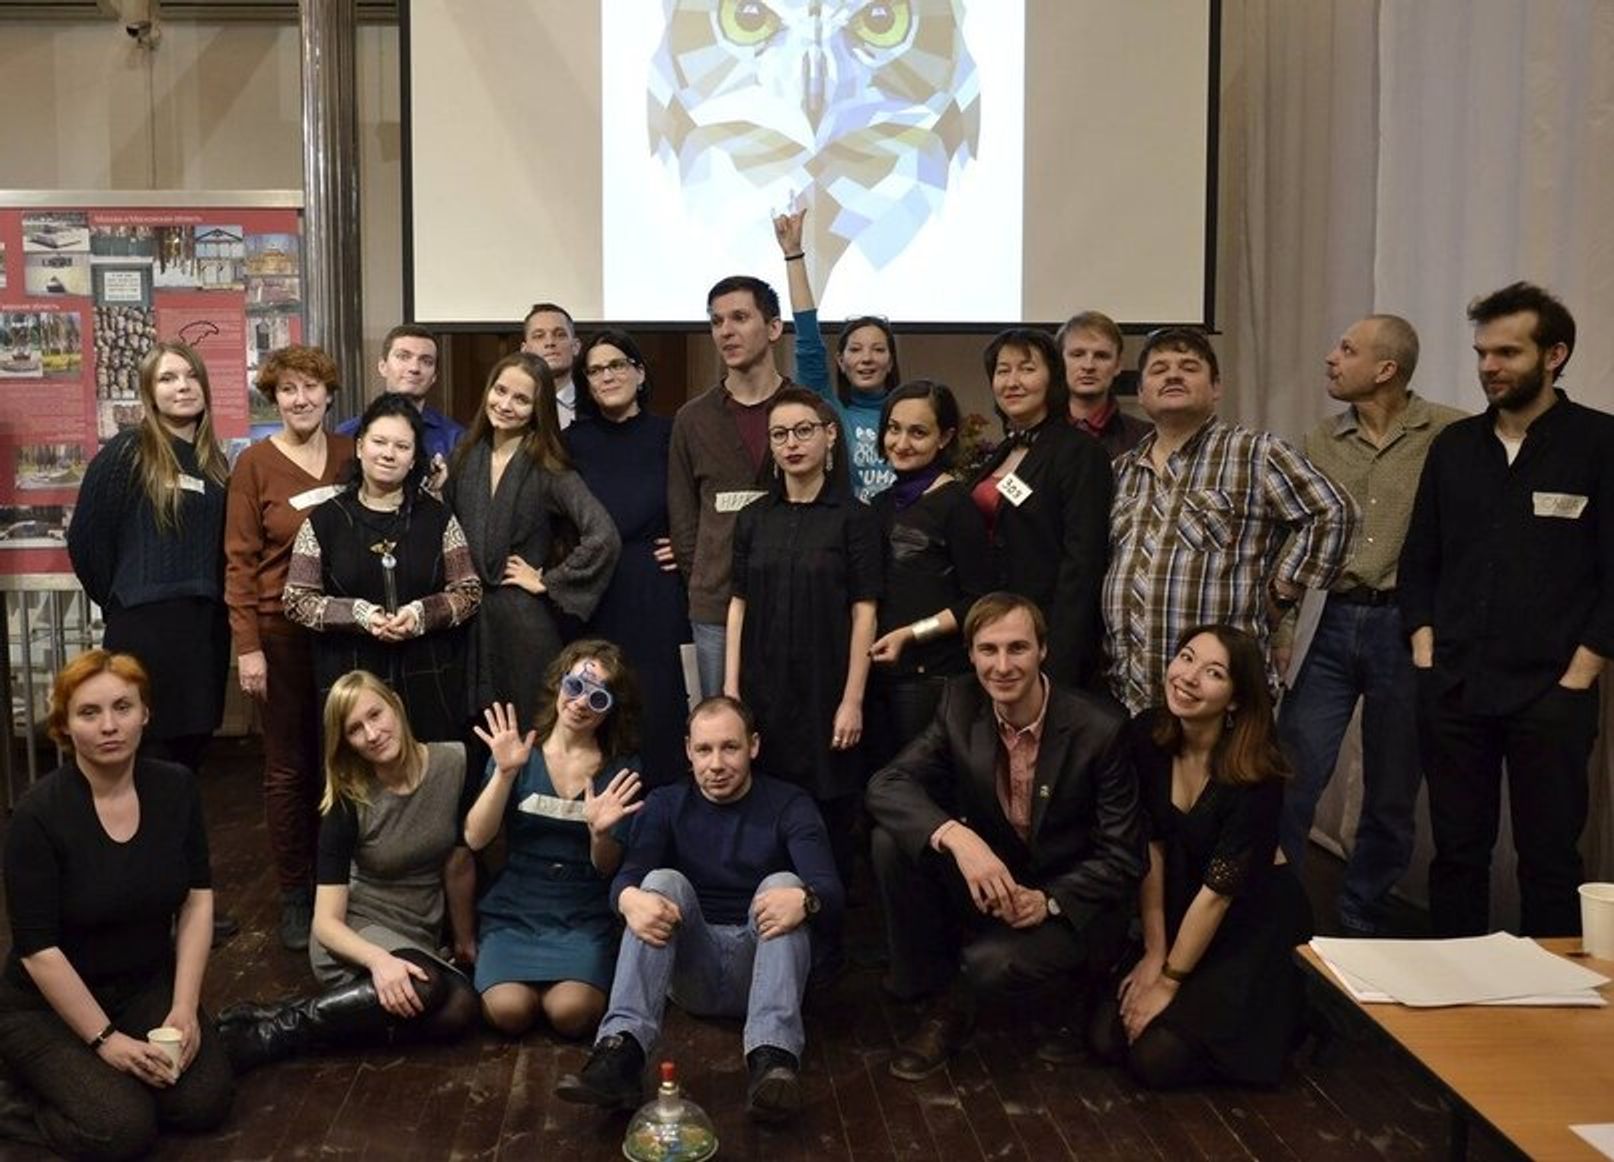 2019 photo of activists from the Moscow Open School of Human Rights. “Ivan Zhikharev” is seated front and center, grabbing his knees.